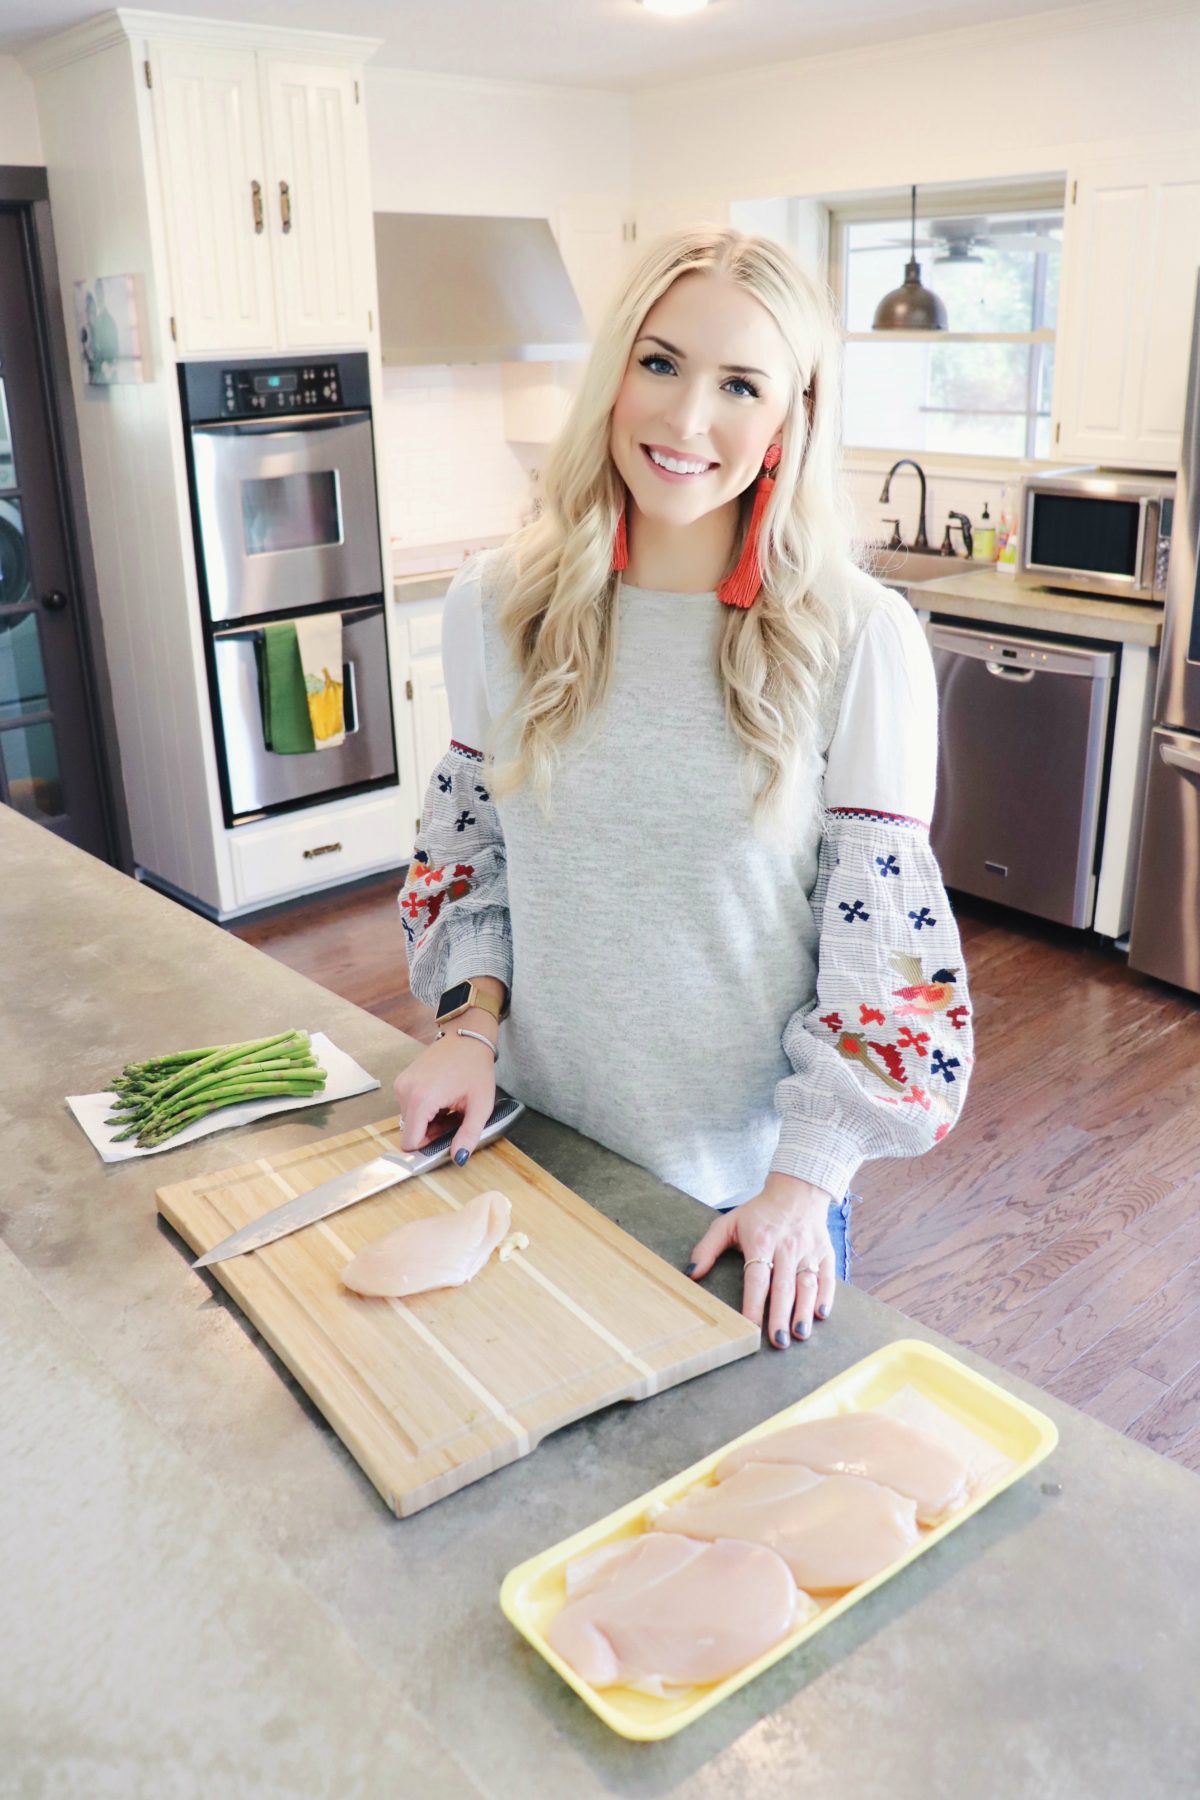 How to Healthy meal prep for a family lifestyled by me Blog